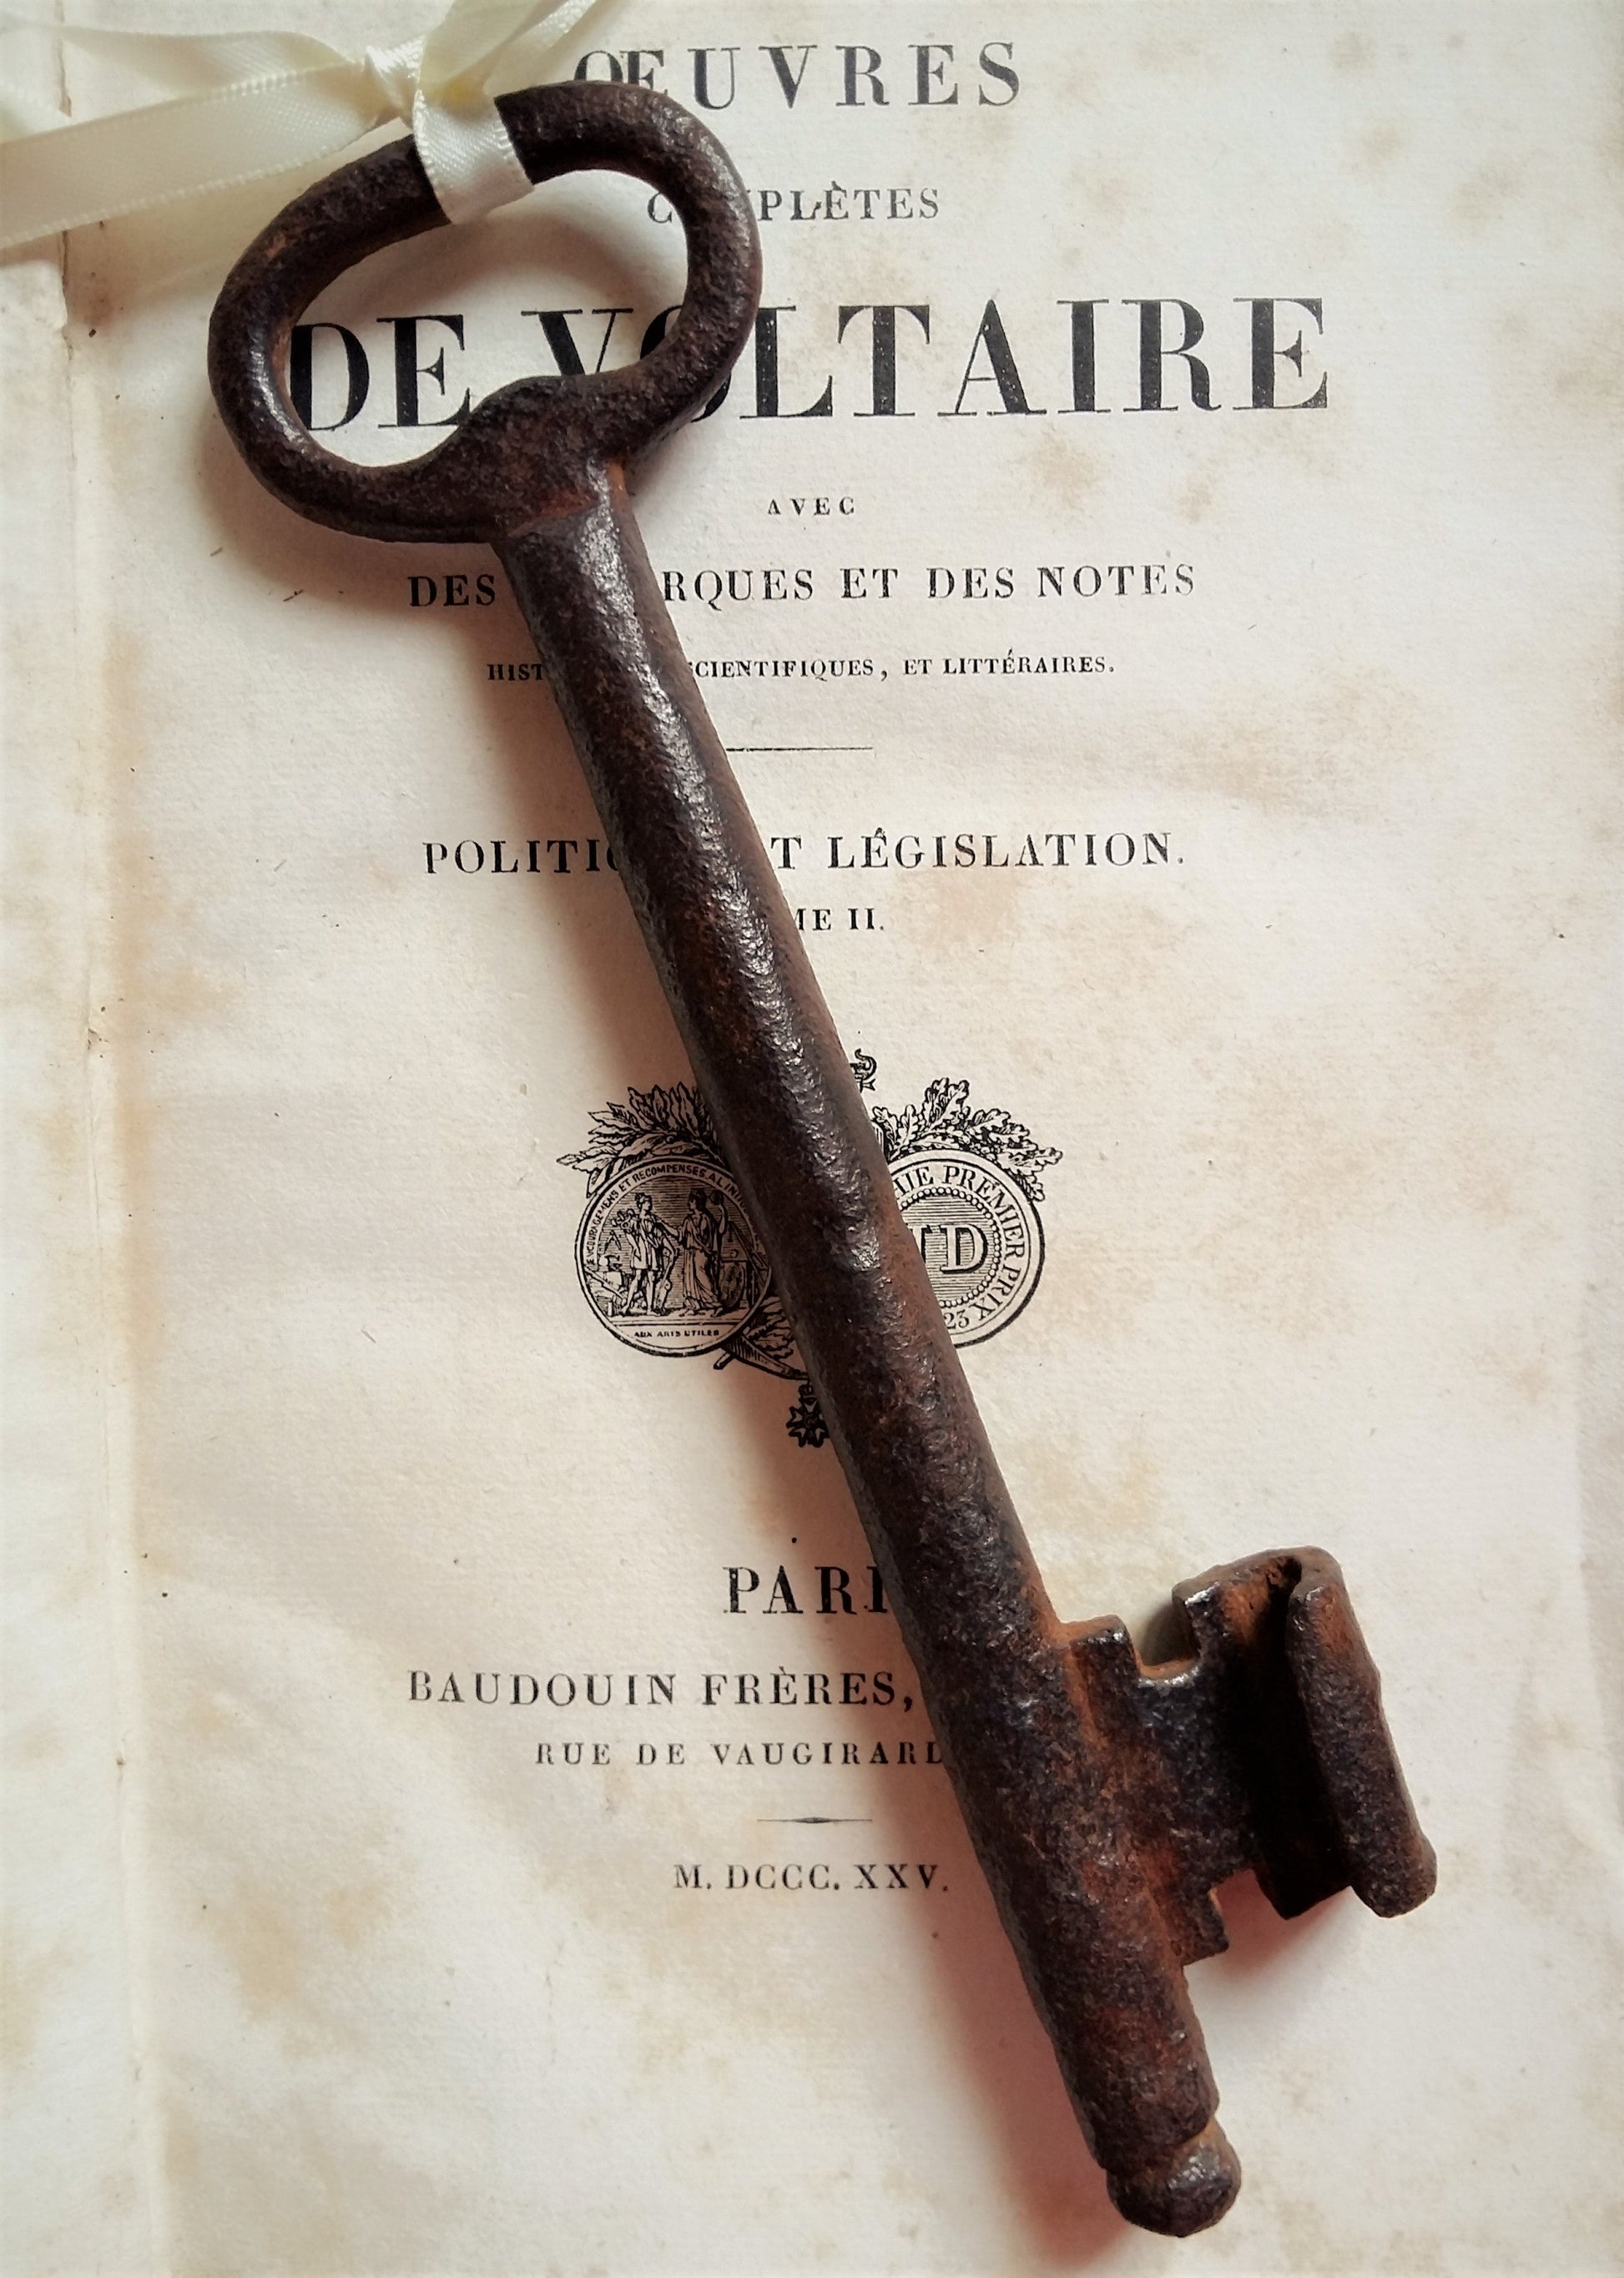 Huge Iron Key. 6¾"/17cms Antique Iron Skeleton Key. Paperweight. from Tiggy & Pip - €32.00! Shop now at Tiggy and Pip